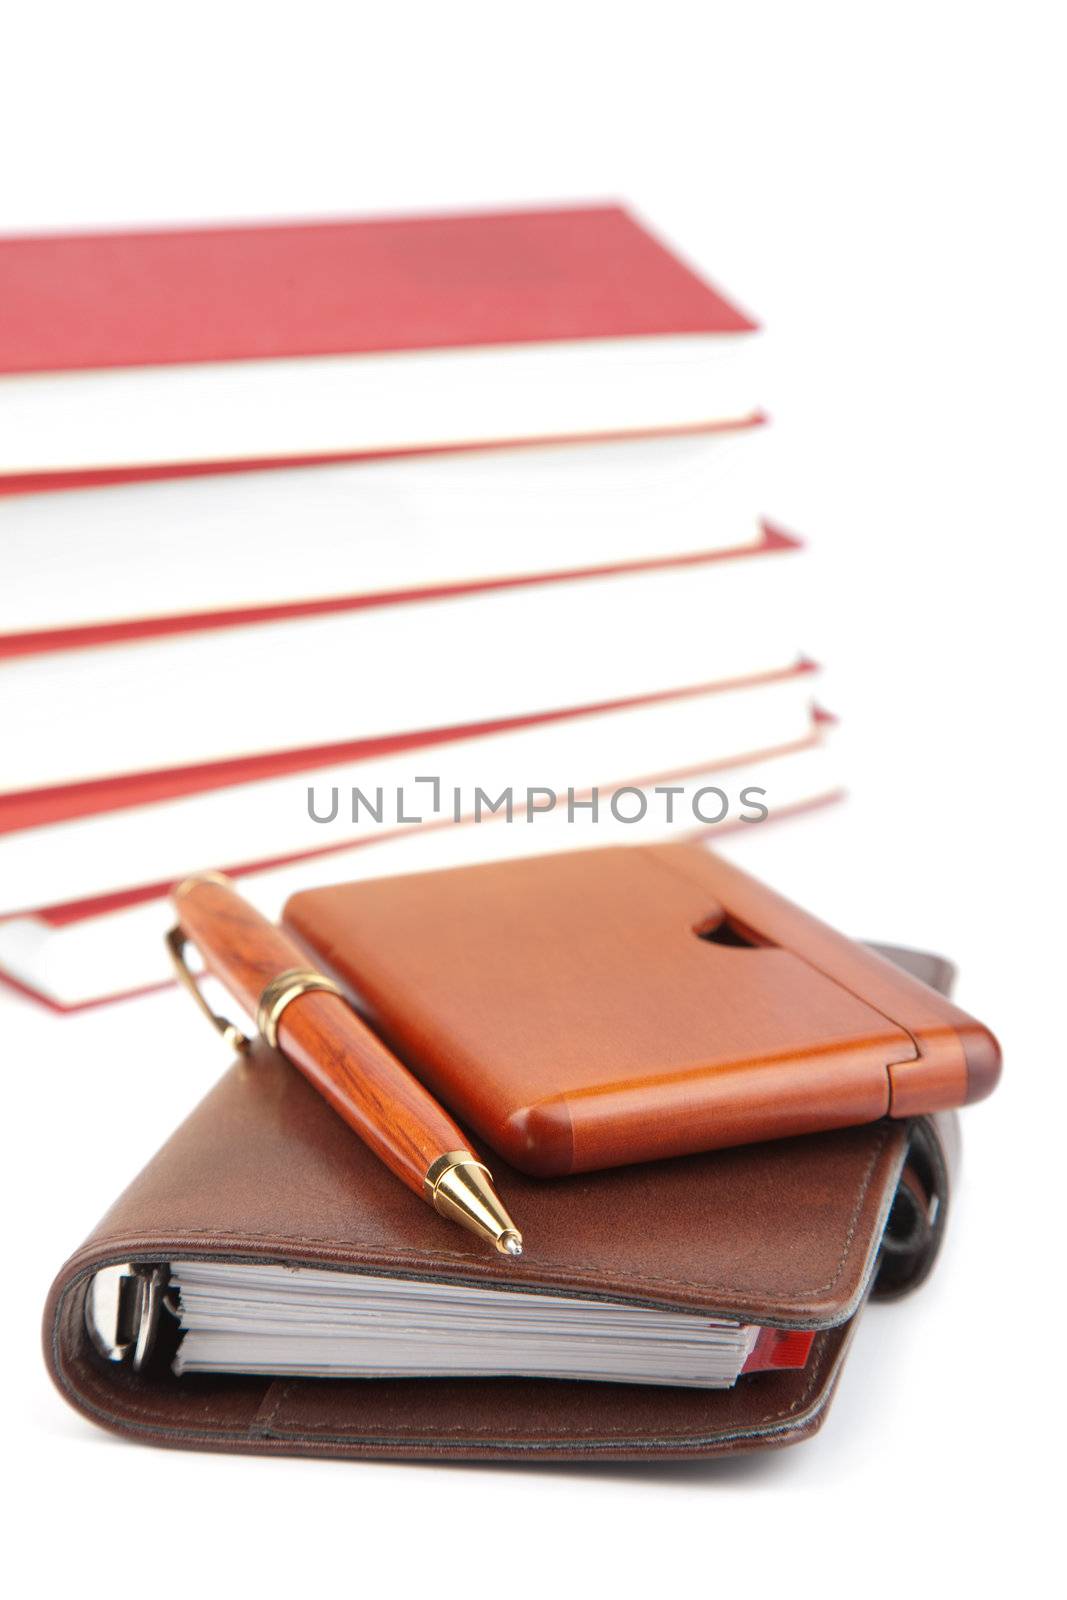 pocket planner and books isolated 